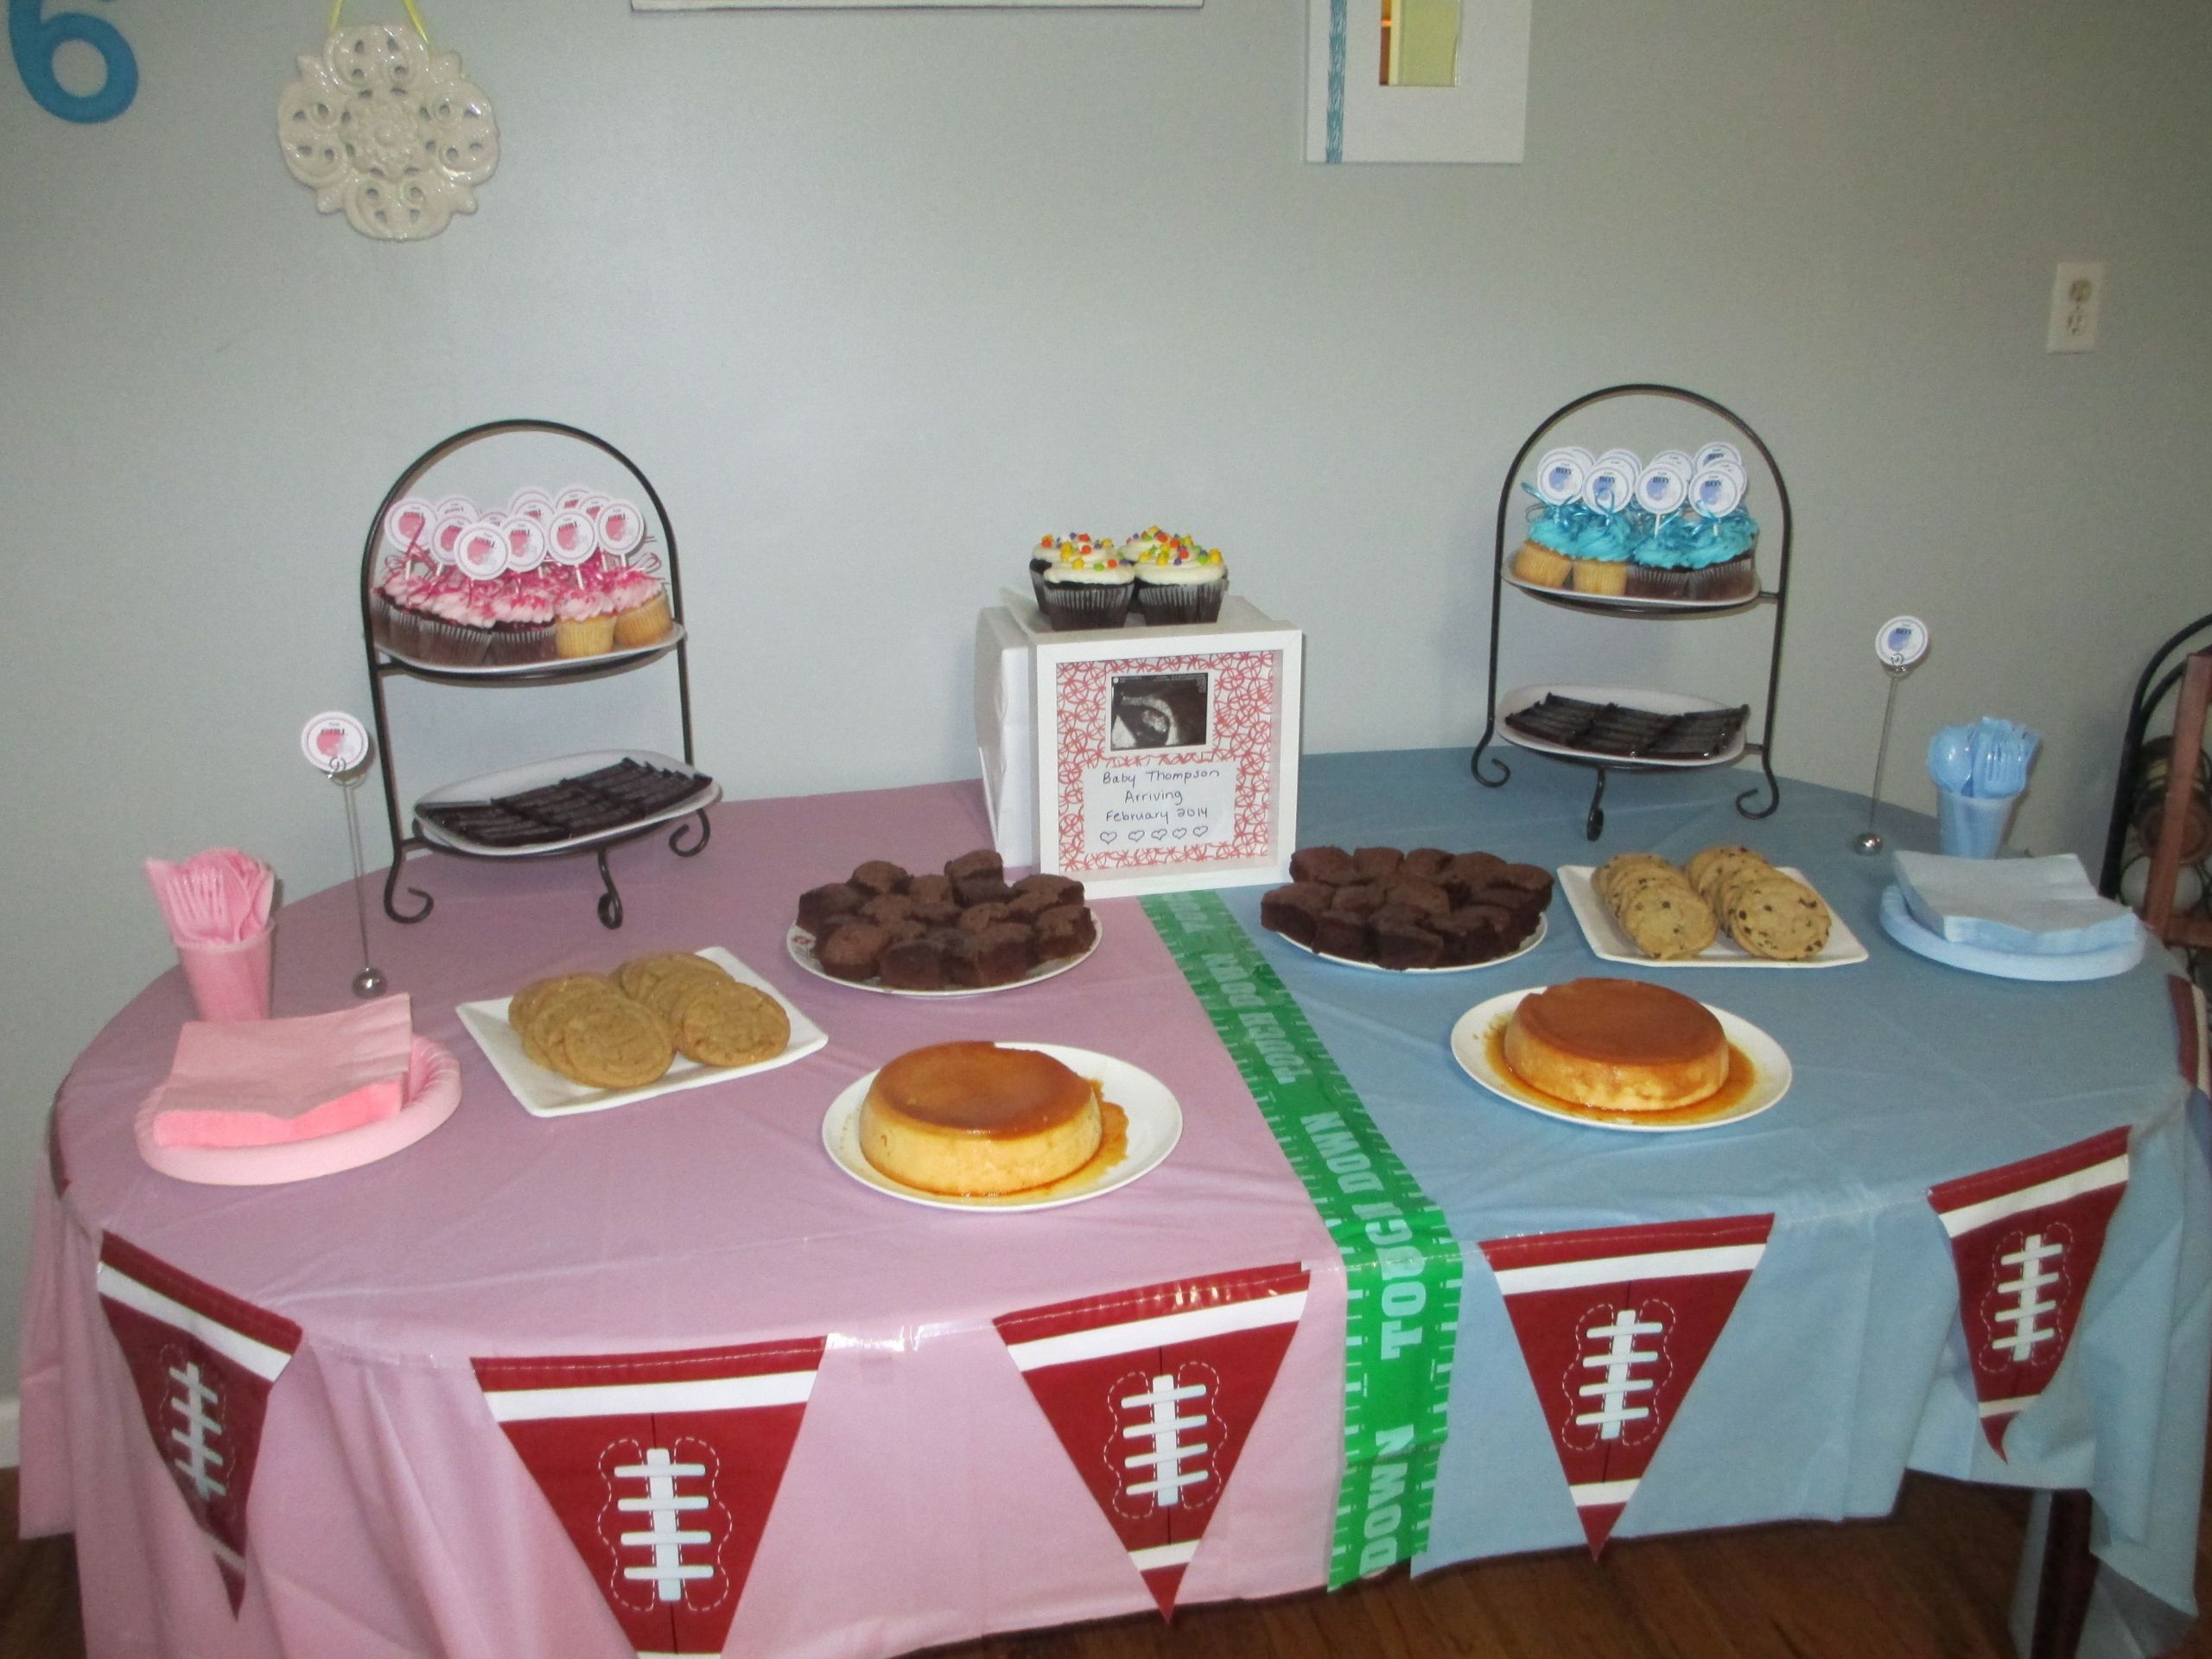 Football Themed Gender Reveal Party Ideas
 Football themed Gender Reveal Pink VS Blue